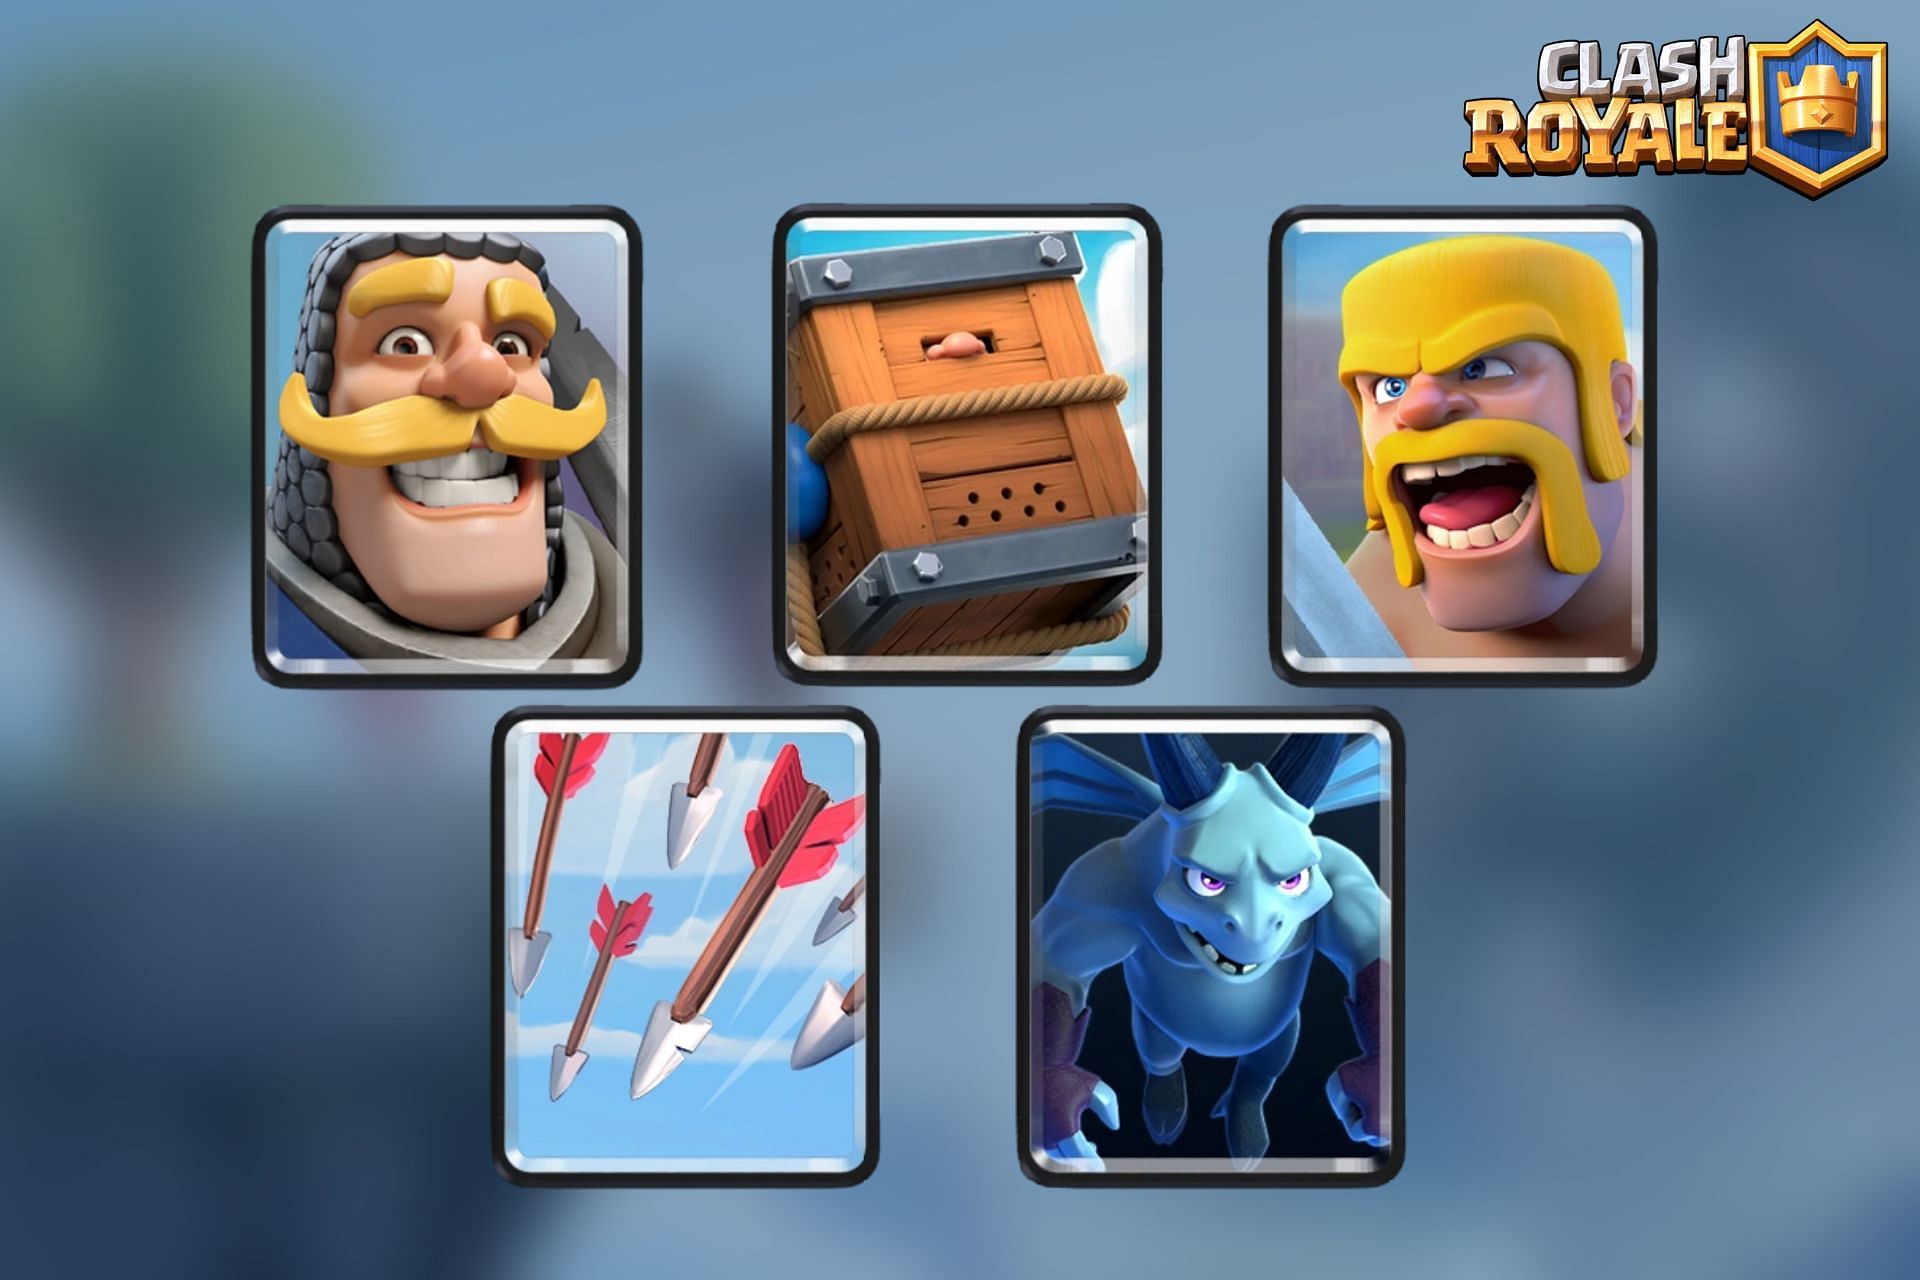 Common cards for the August Royal Tournament in Clash Royale (Image via Sportskeeda)